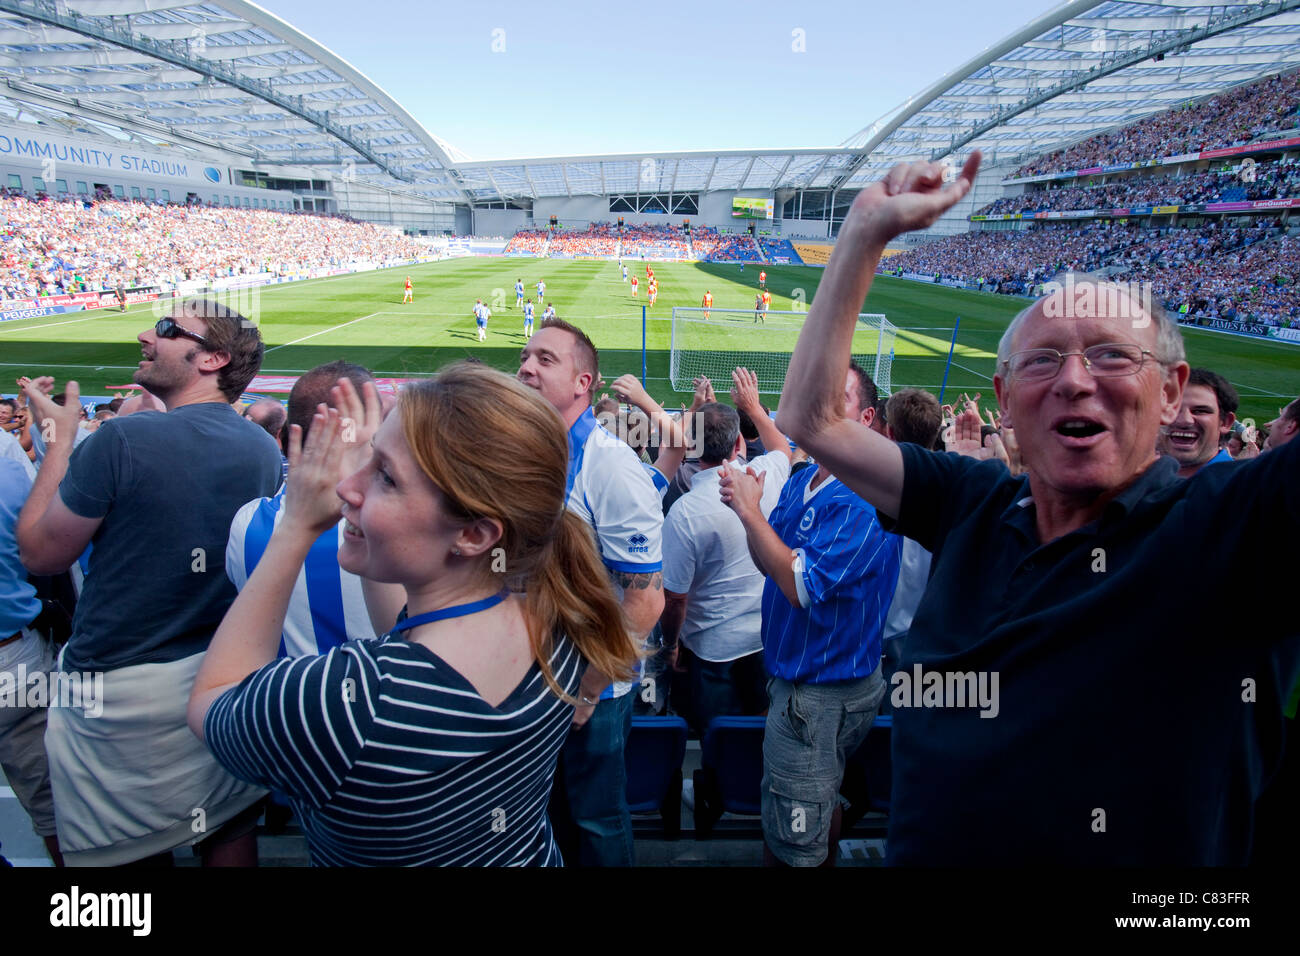 Brighton et Hove Albion Football fans, le stade communautaire American Express (Amex), Brighton, Sussex, Angleterre Banque D'Images